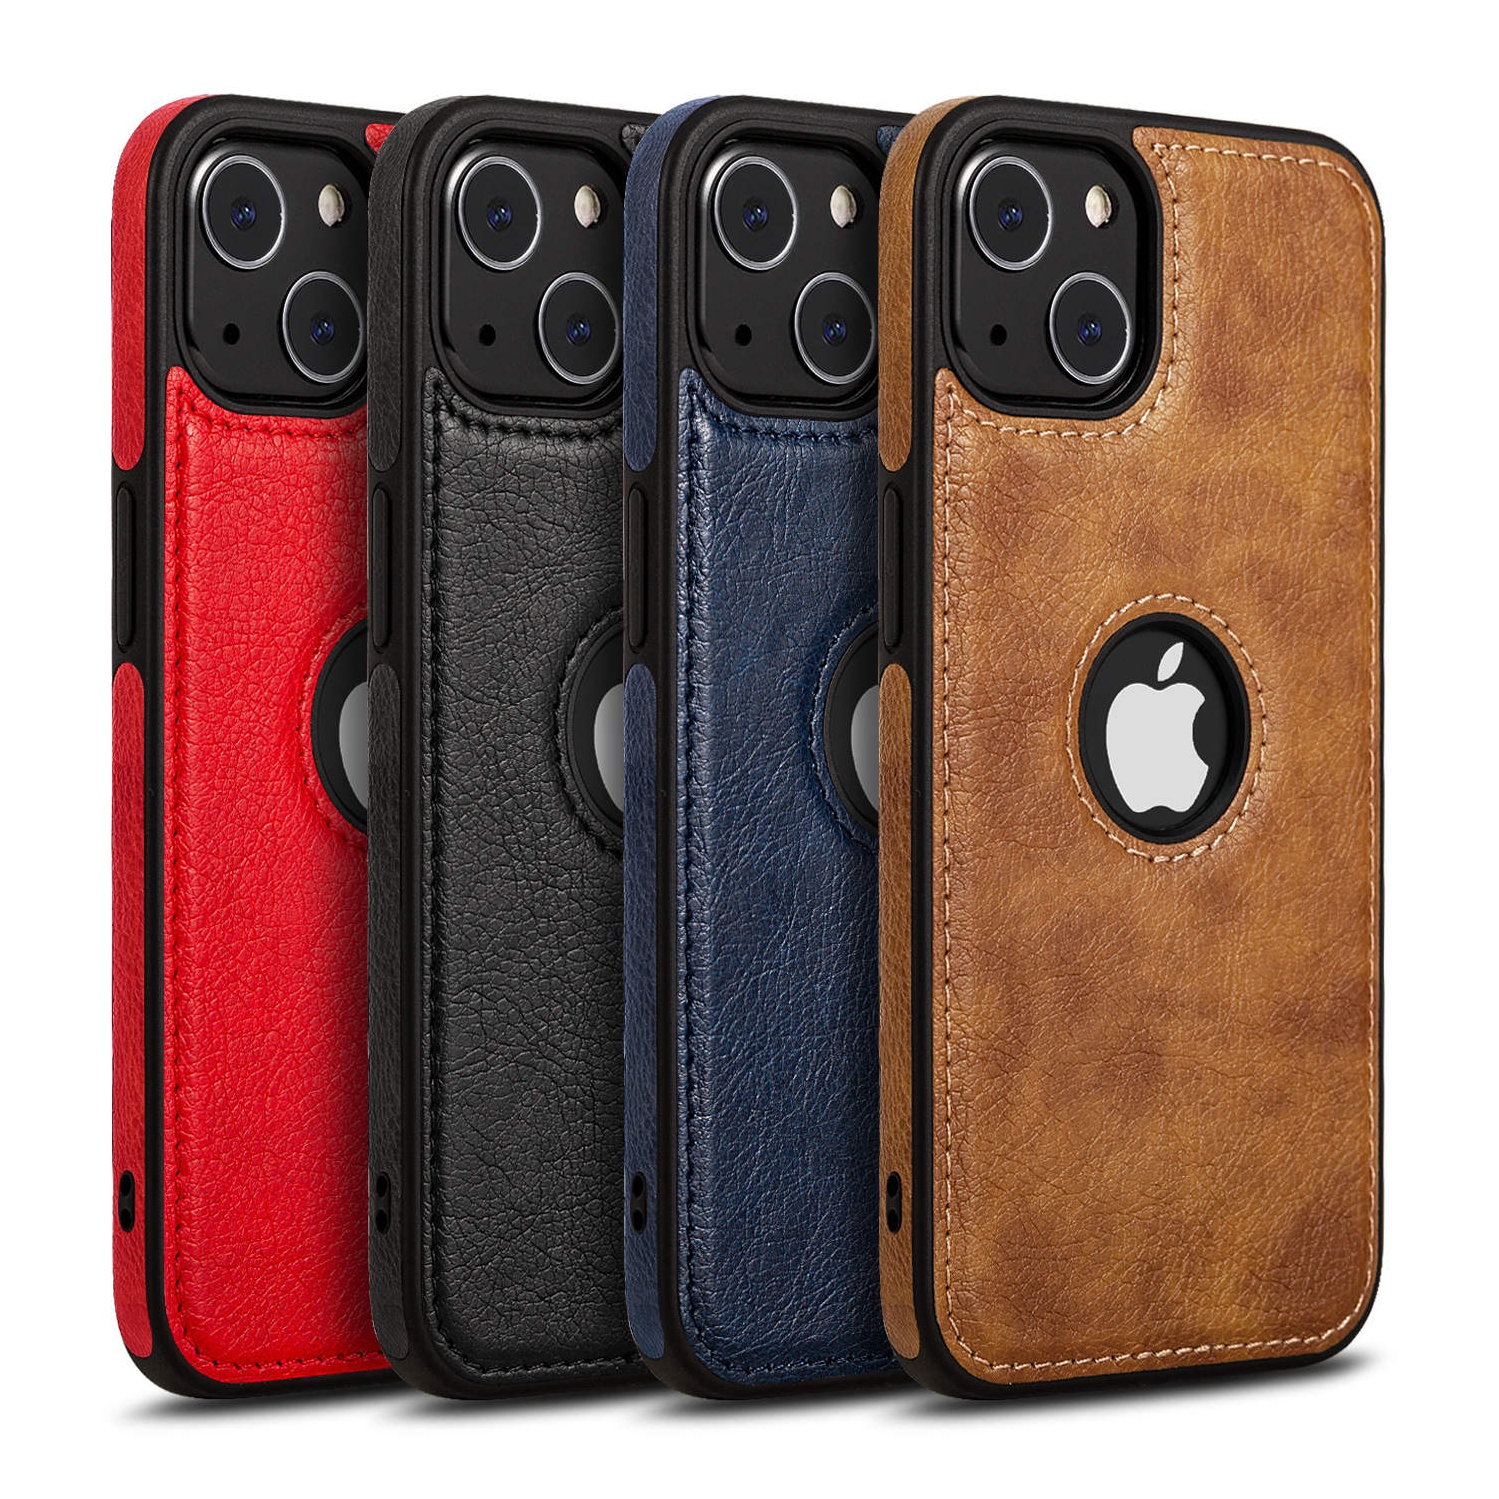 Unique Design Luxury TPU Leather Business Phone Case for iPhone 13 Pro Max Anti-Slip Scratch Resistant Ultra Slim Protective Case